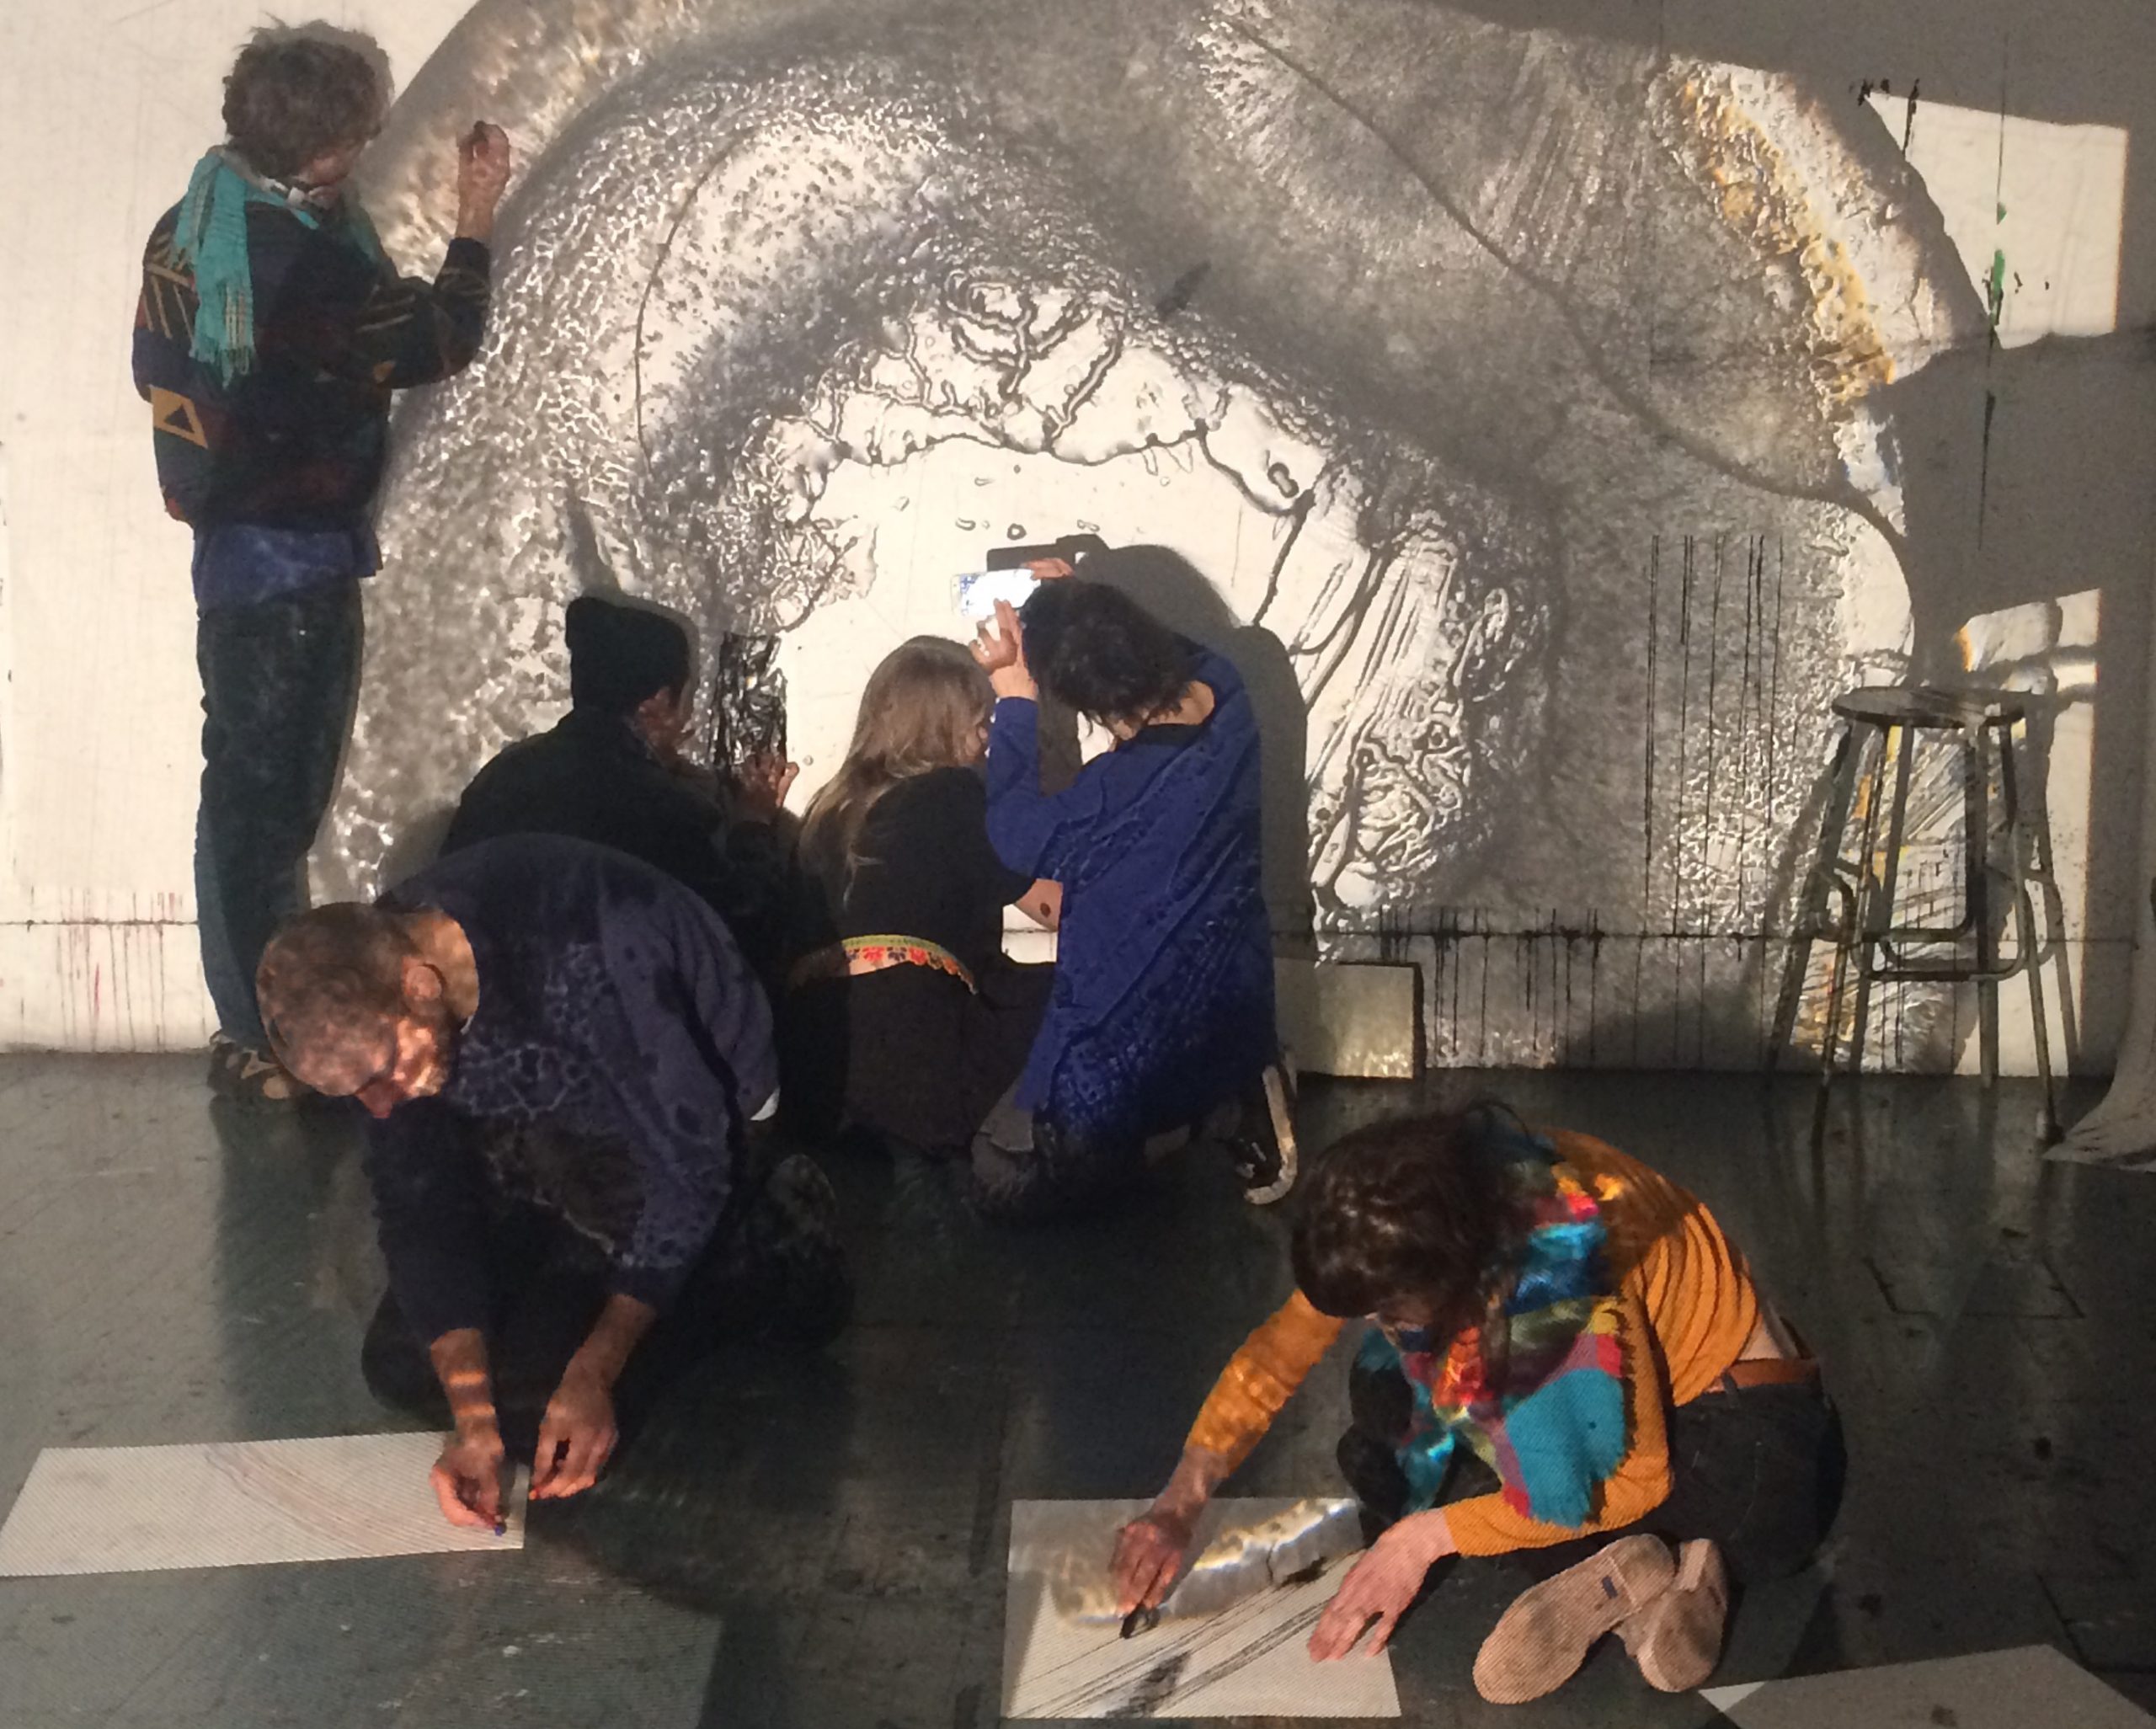 group of students interacting during a workshop at the Royal College of Art, 2016